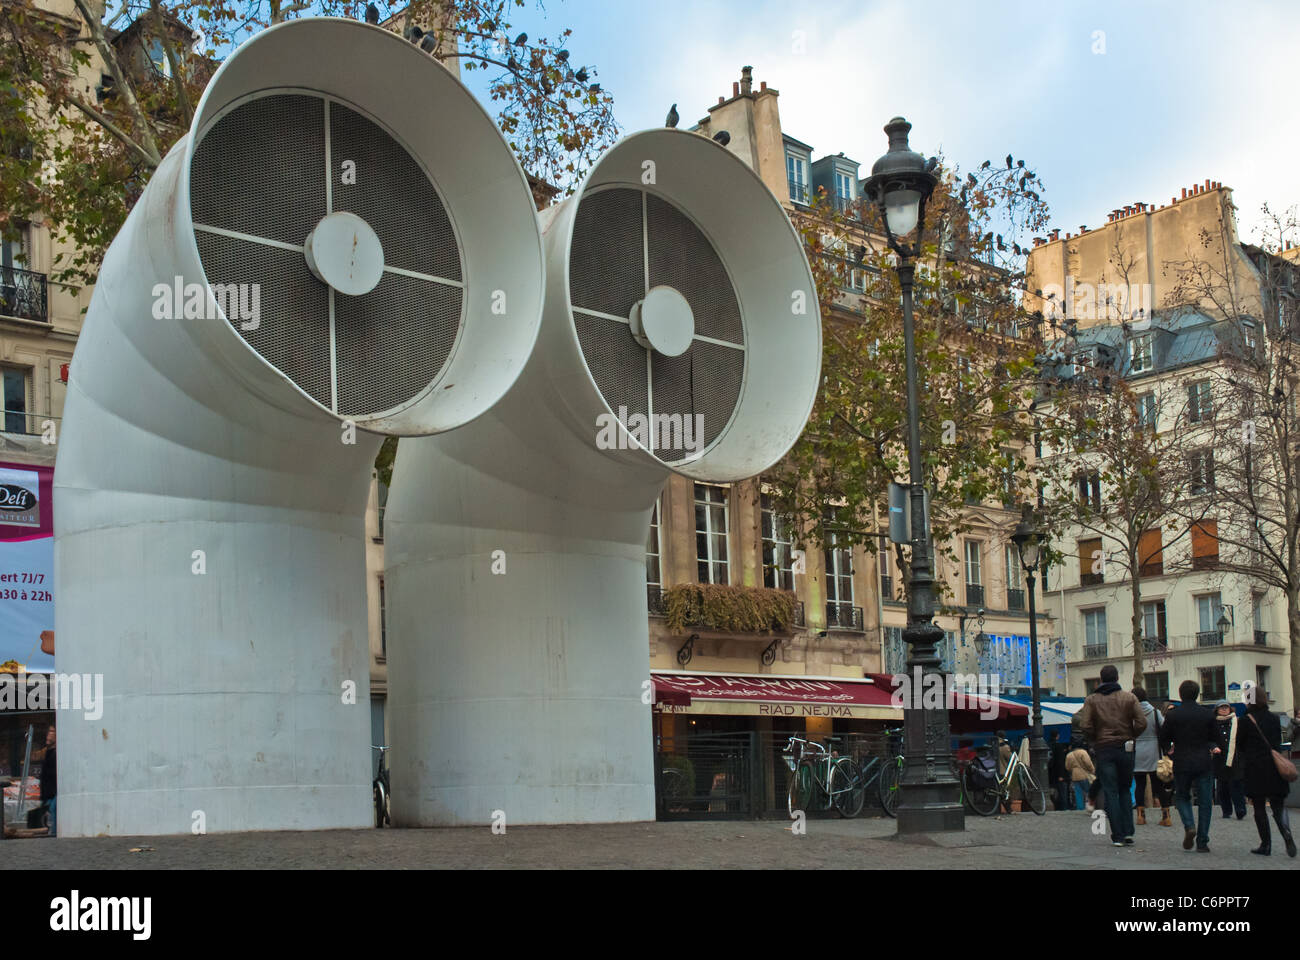 Enormous air vents of the Pompidou Art Centre, Paris, towering over the street scene. Post Modern architecture. Stock Photo